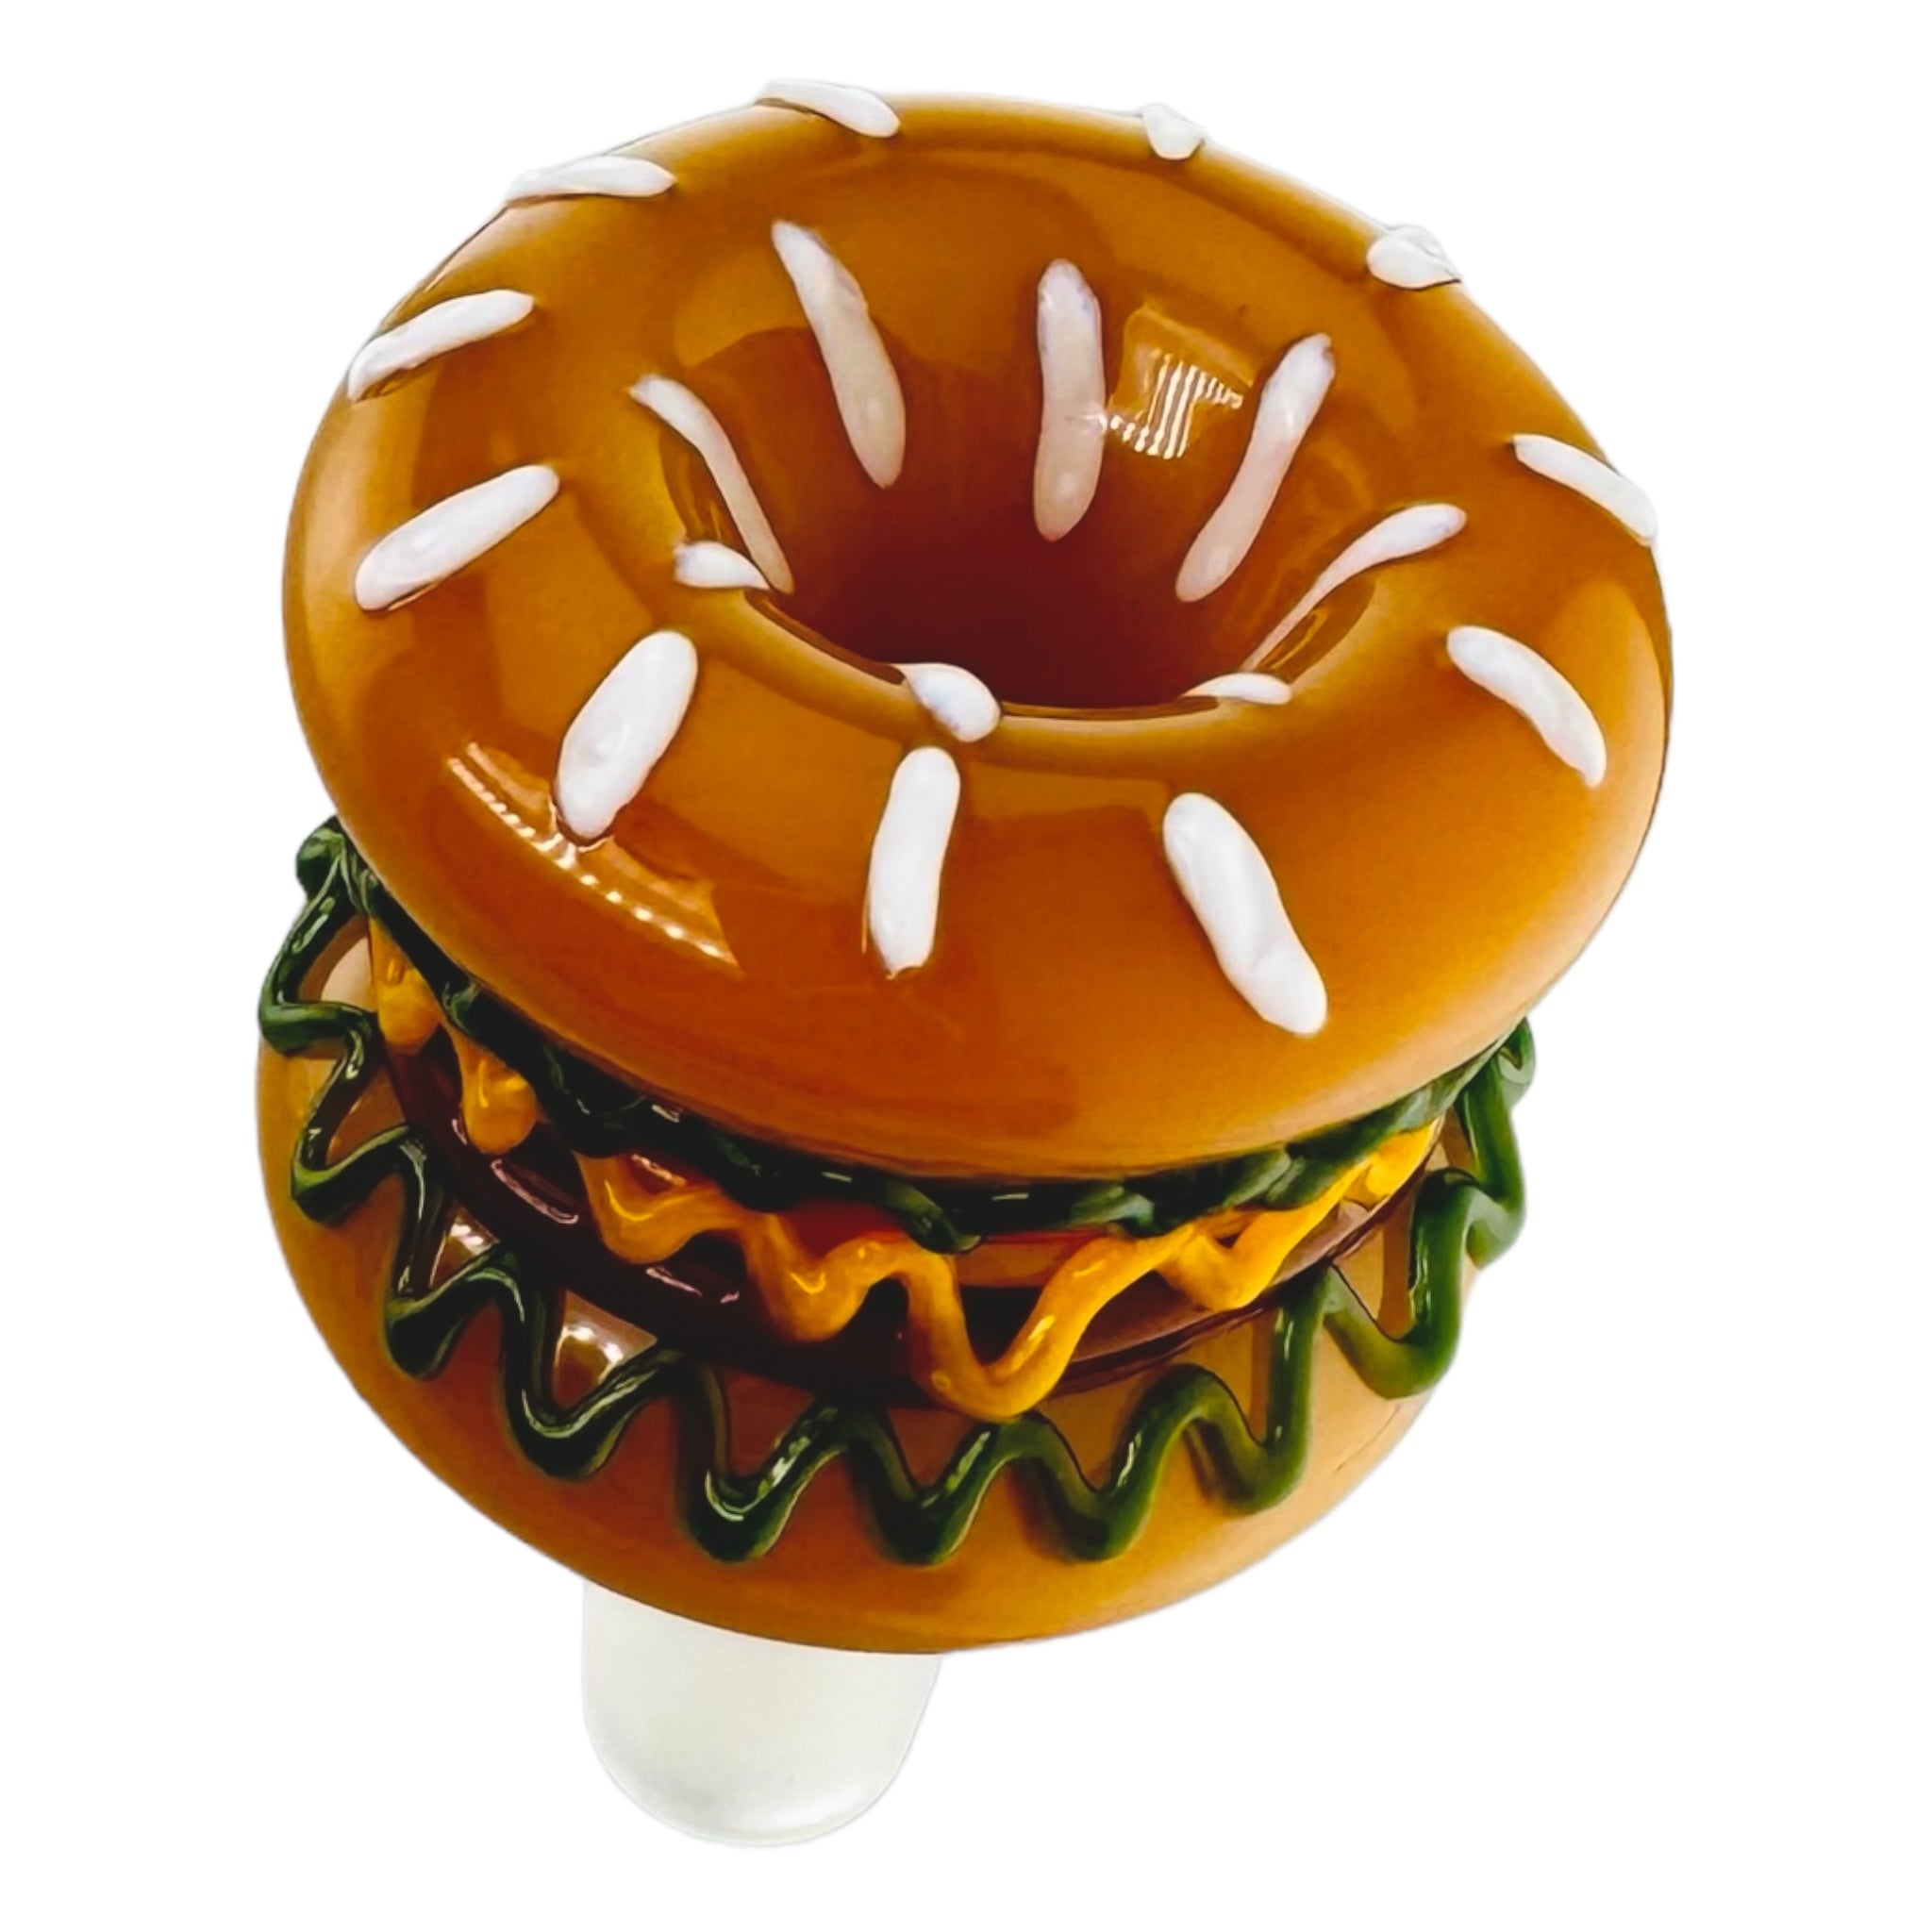 14mm bong bowl that looks like a Hamburger for sale free shipping